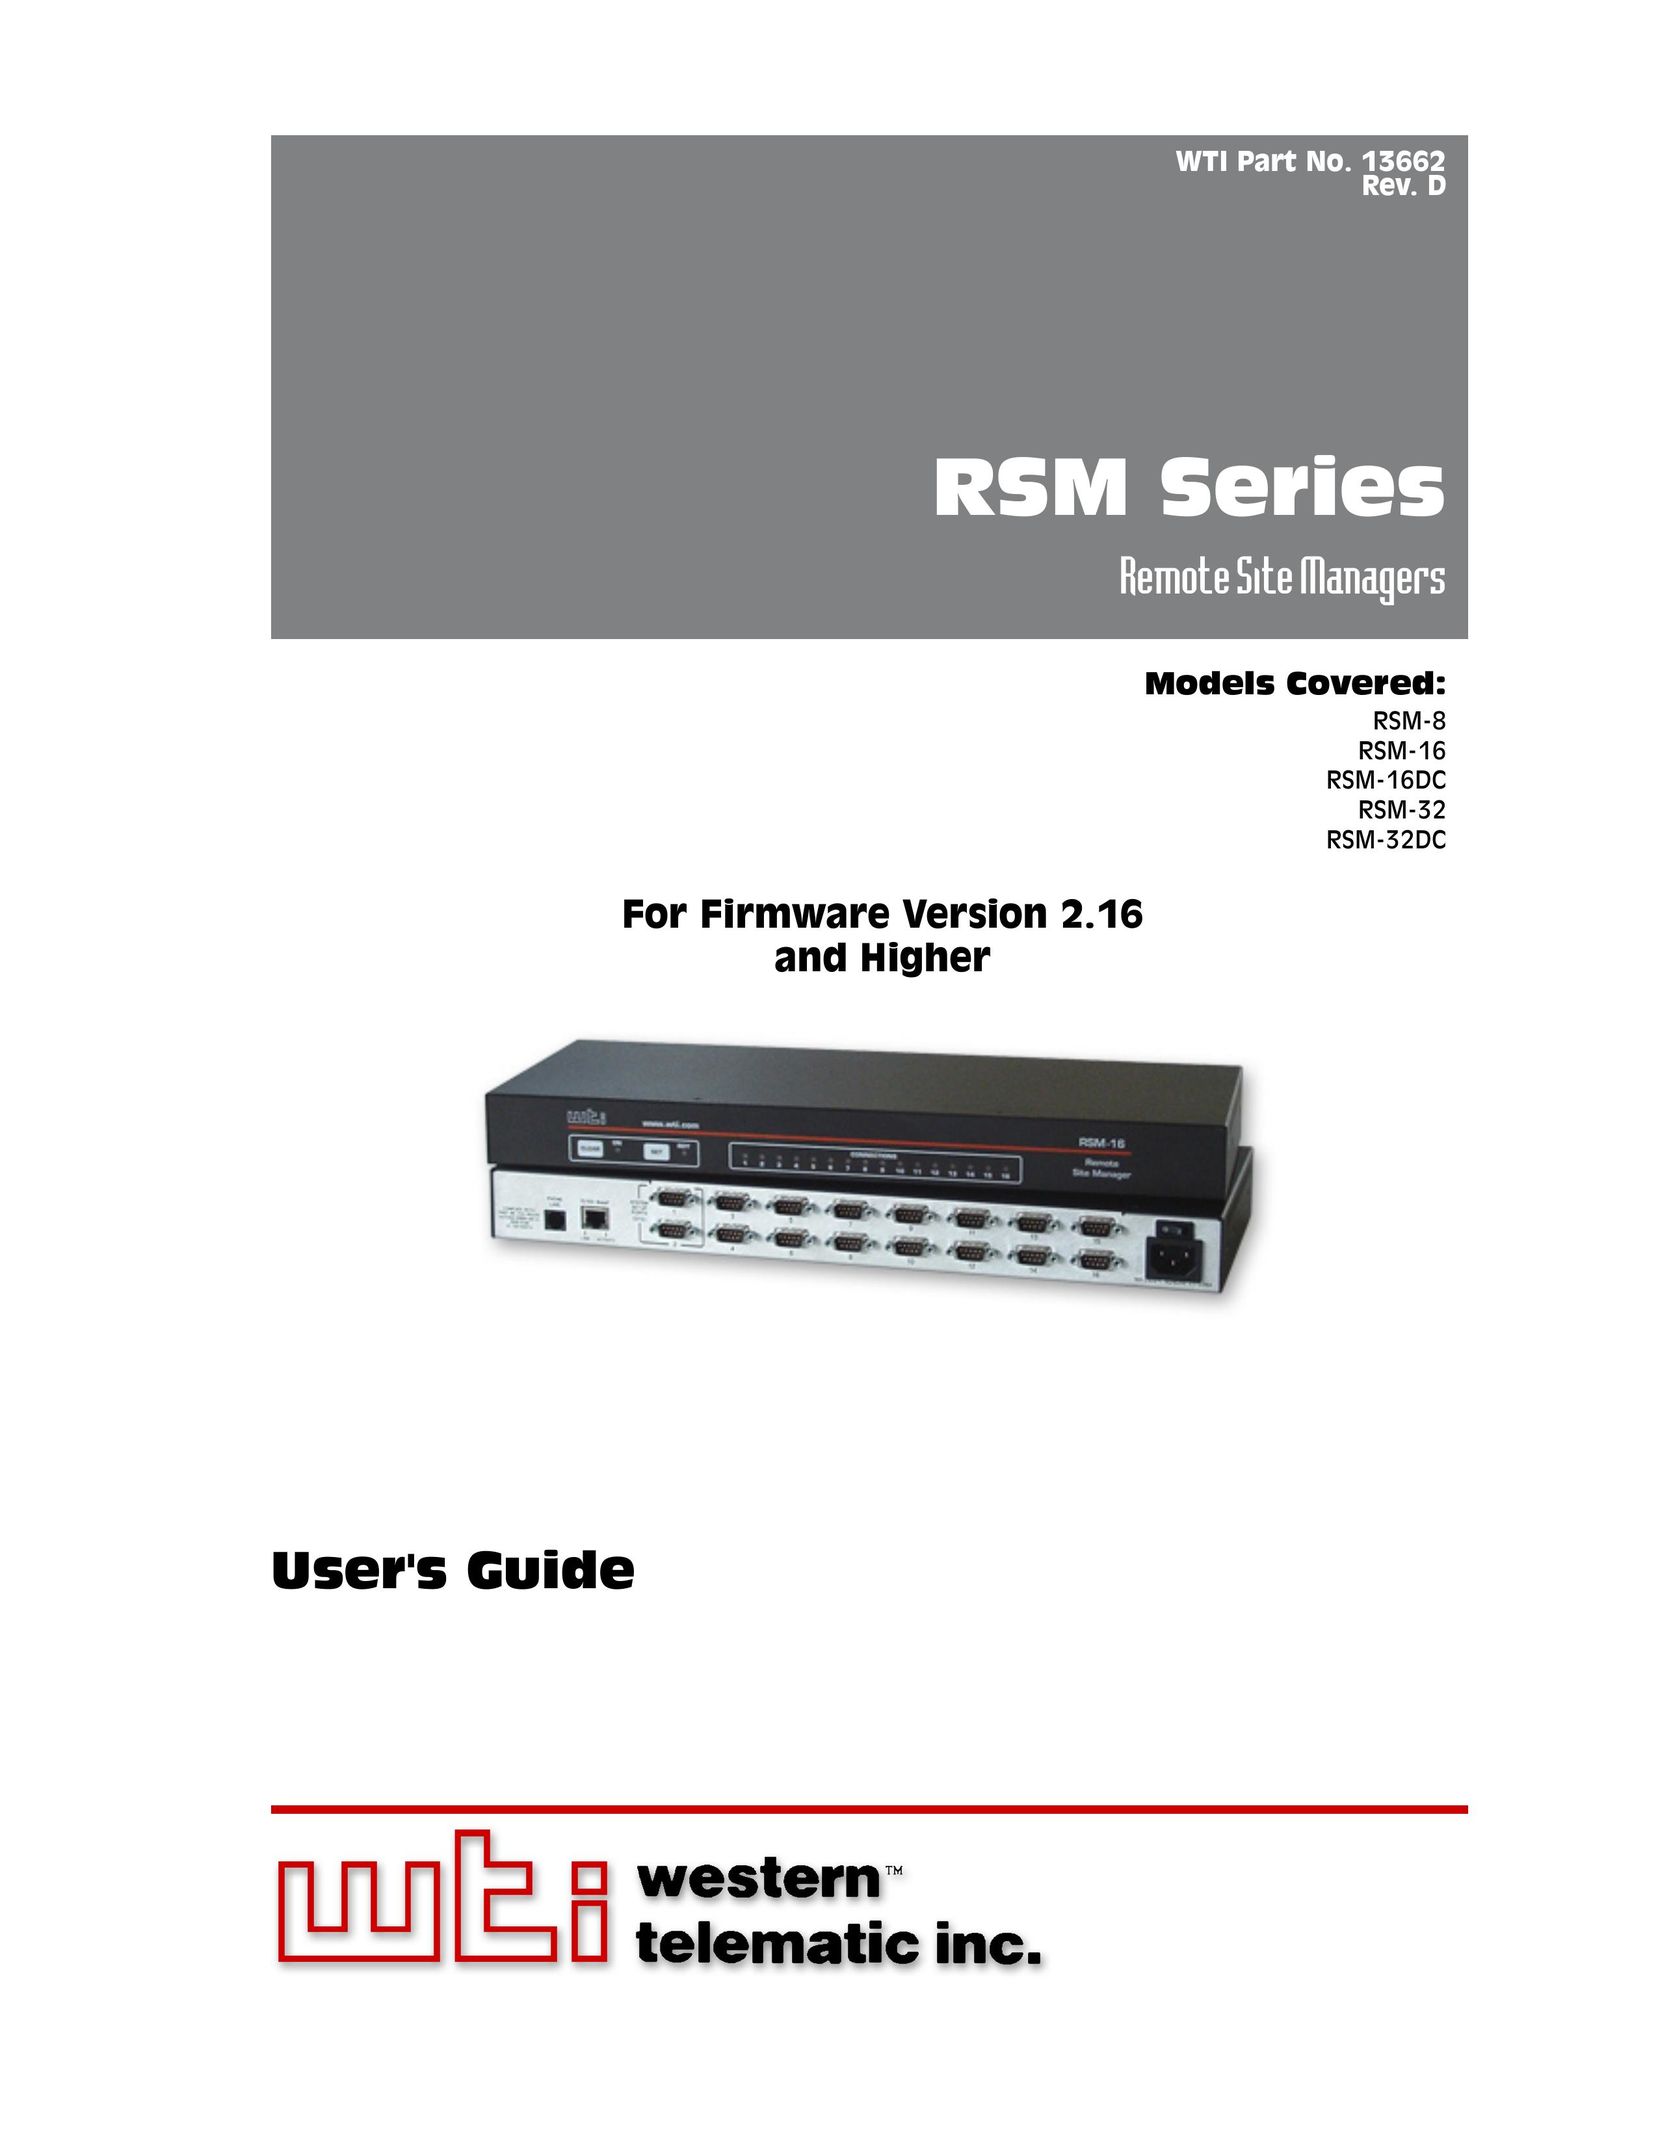 Western Telematic RSM-8 Video Gaming Accessories User Manual (Page 1)